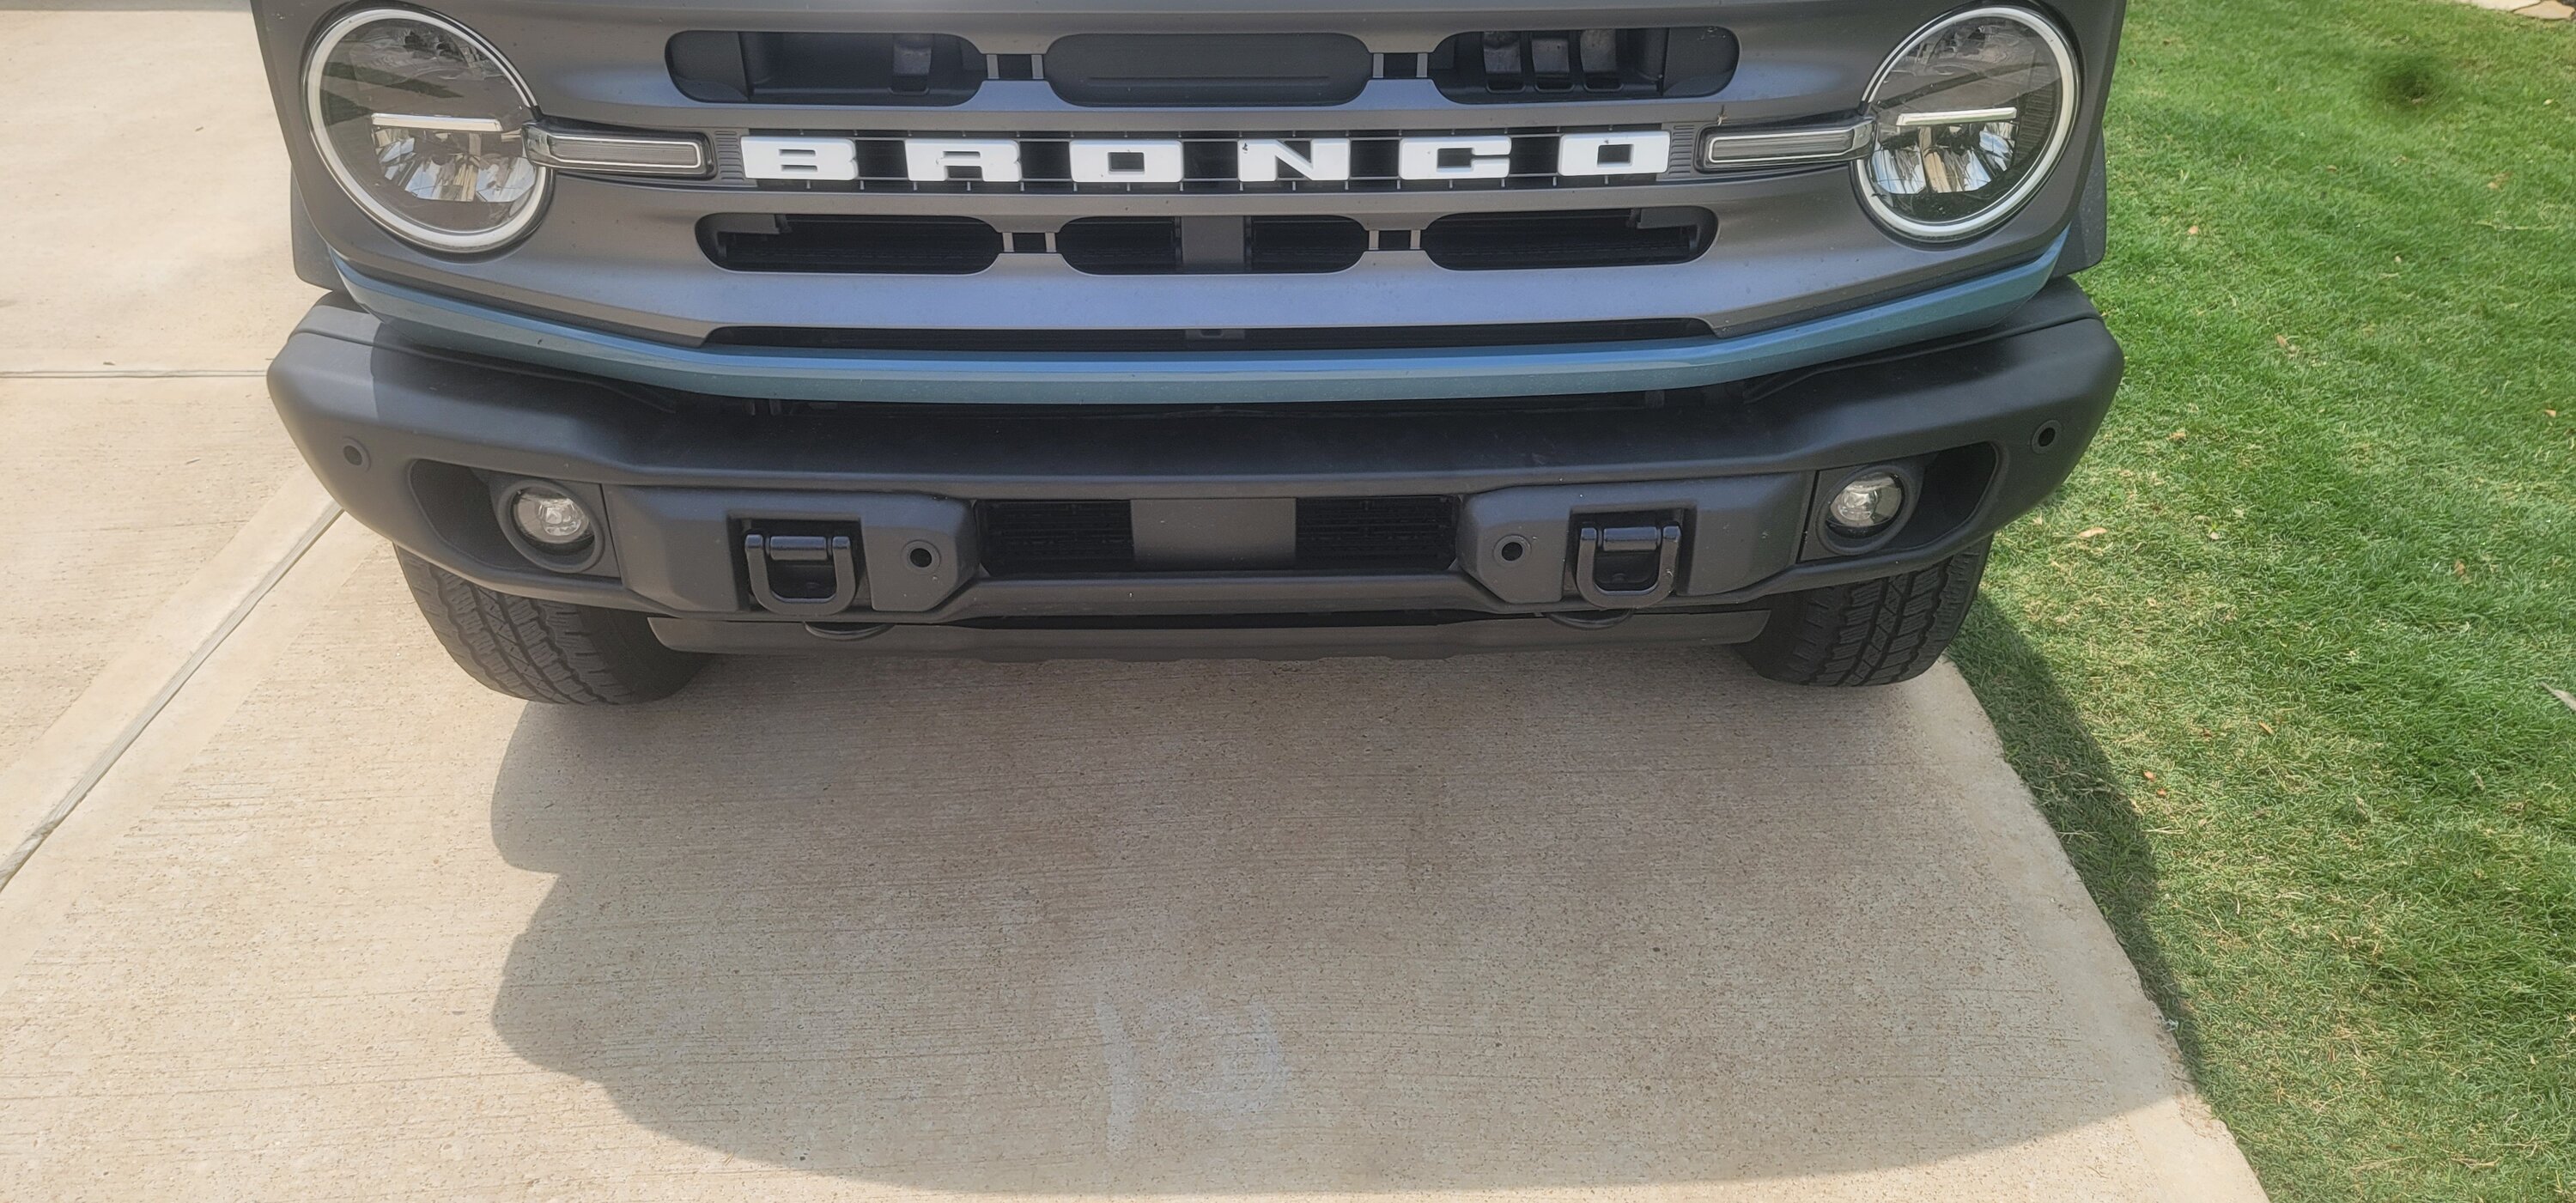 Ford Bronco Swapping plastic bumper for Capable Bumper? 20230505_123524